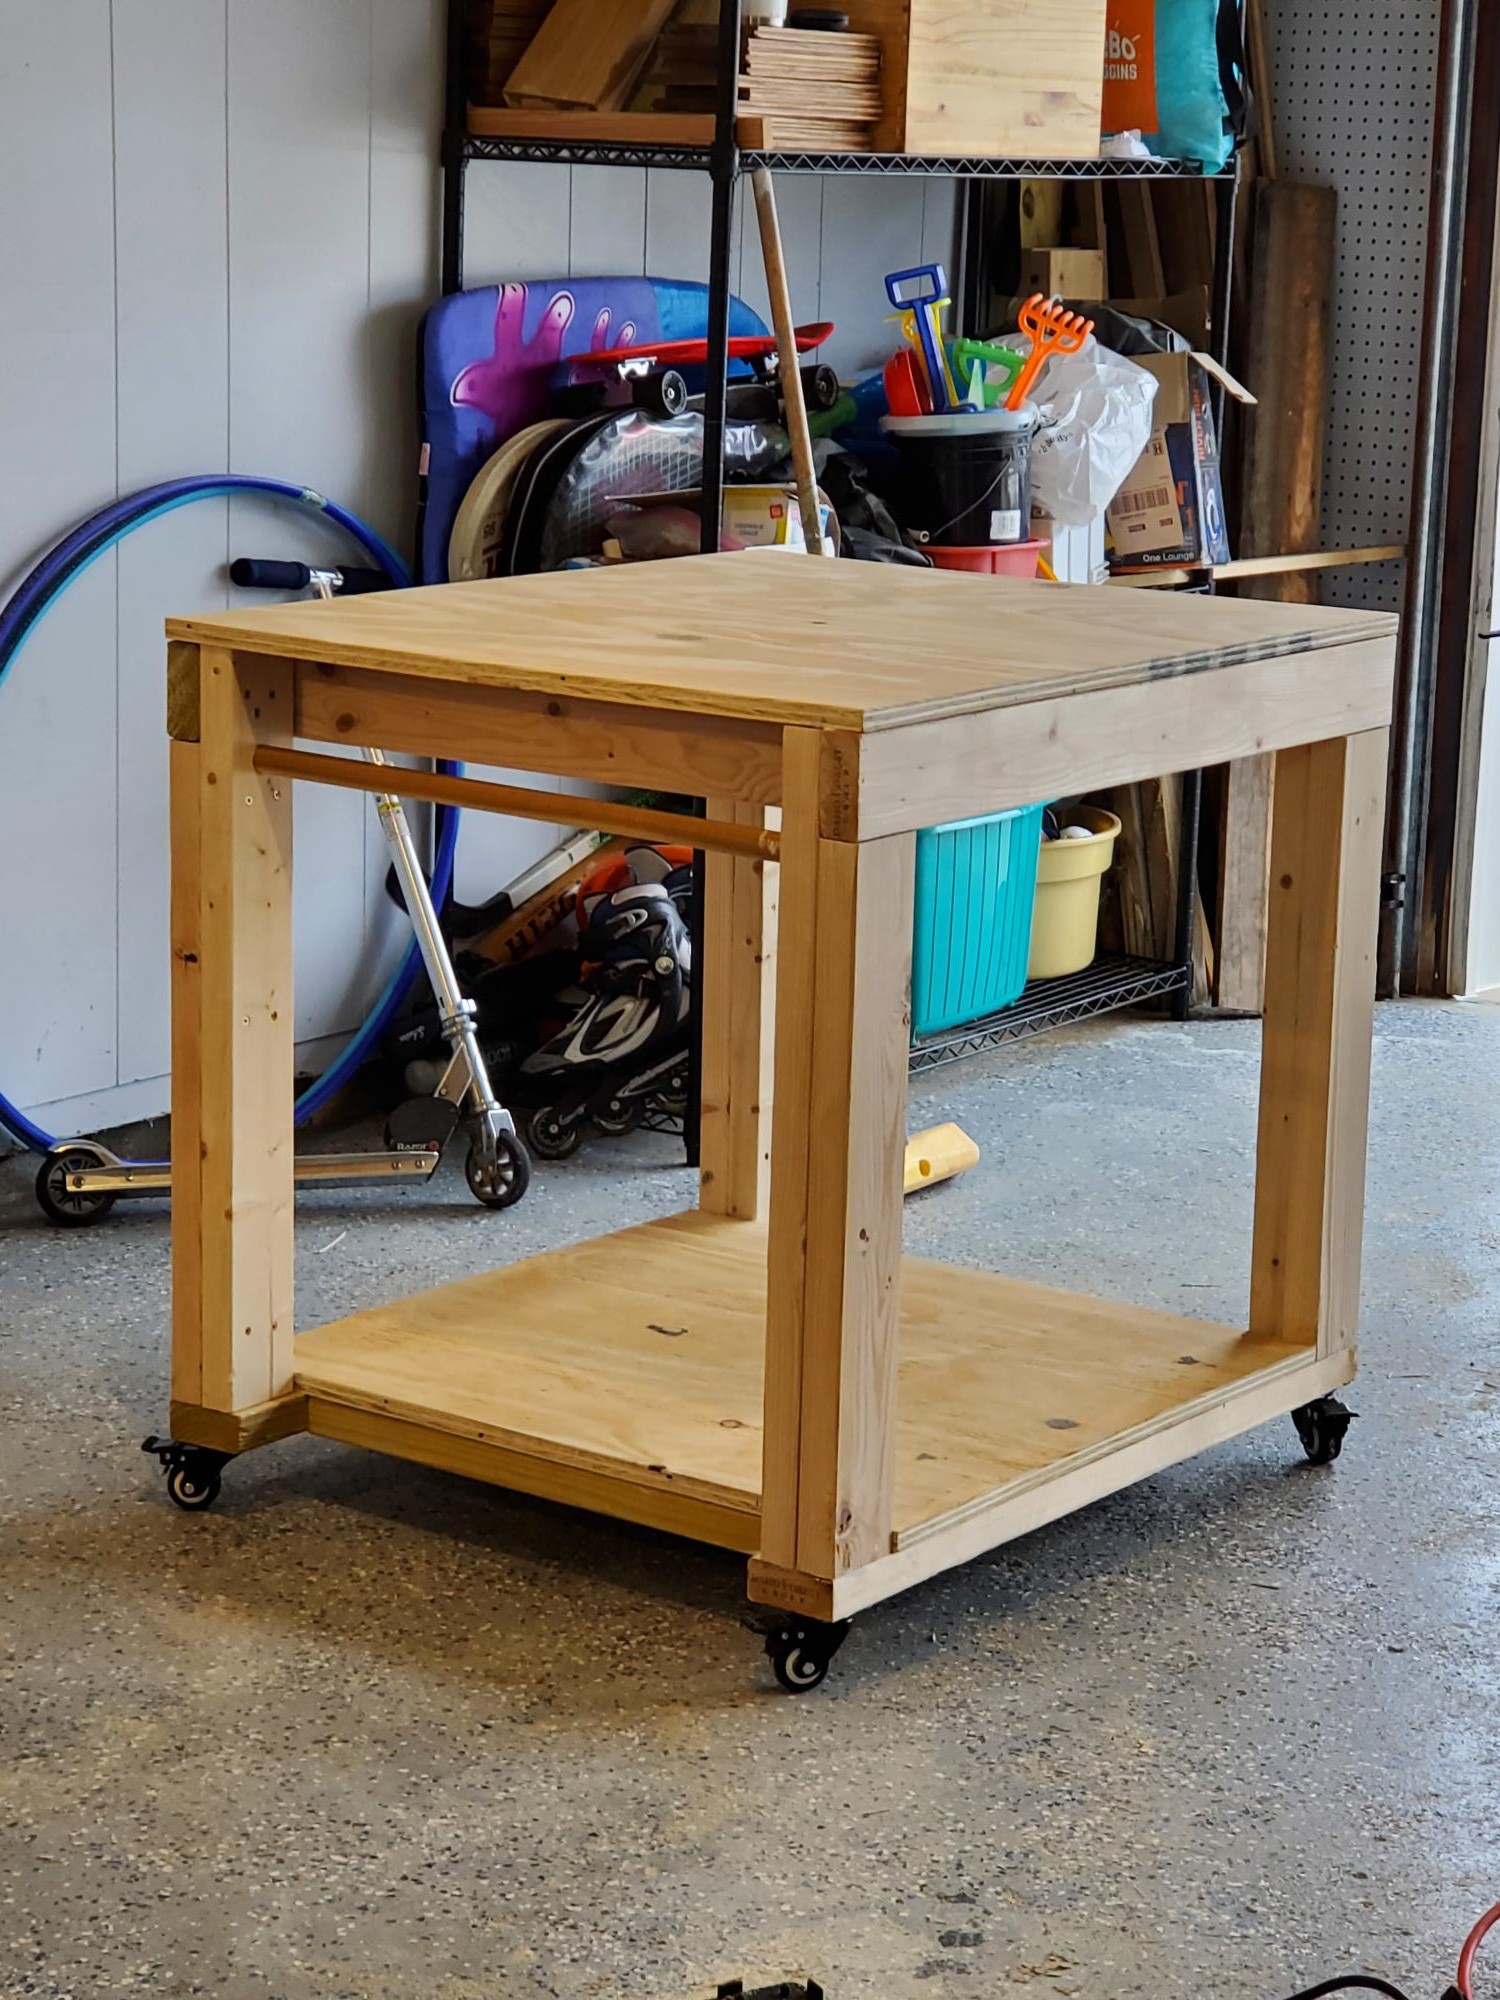 15 Garage Workbench Ideas to Make the Most of Your Workspace